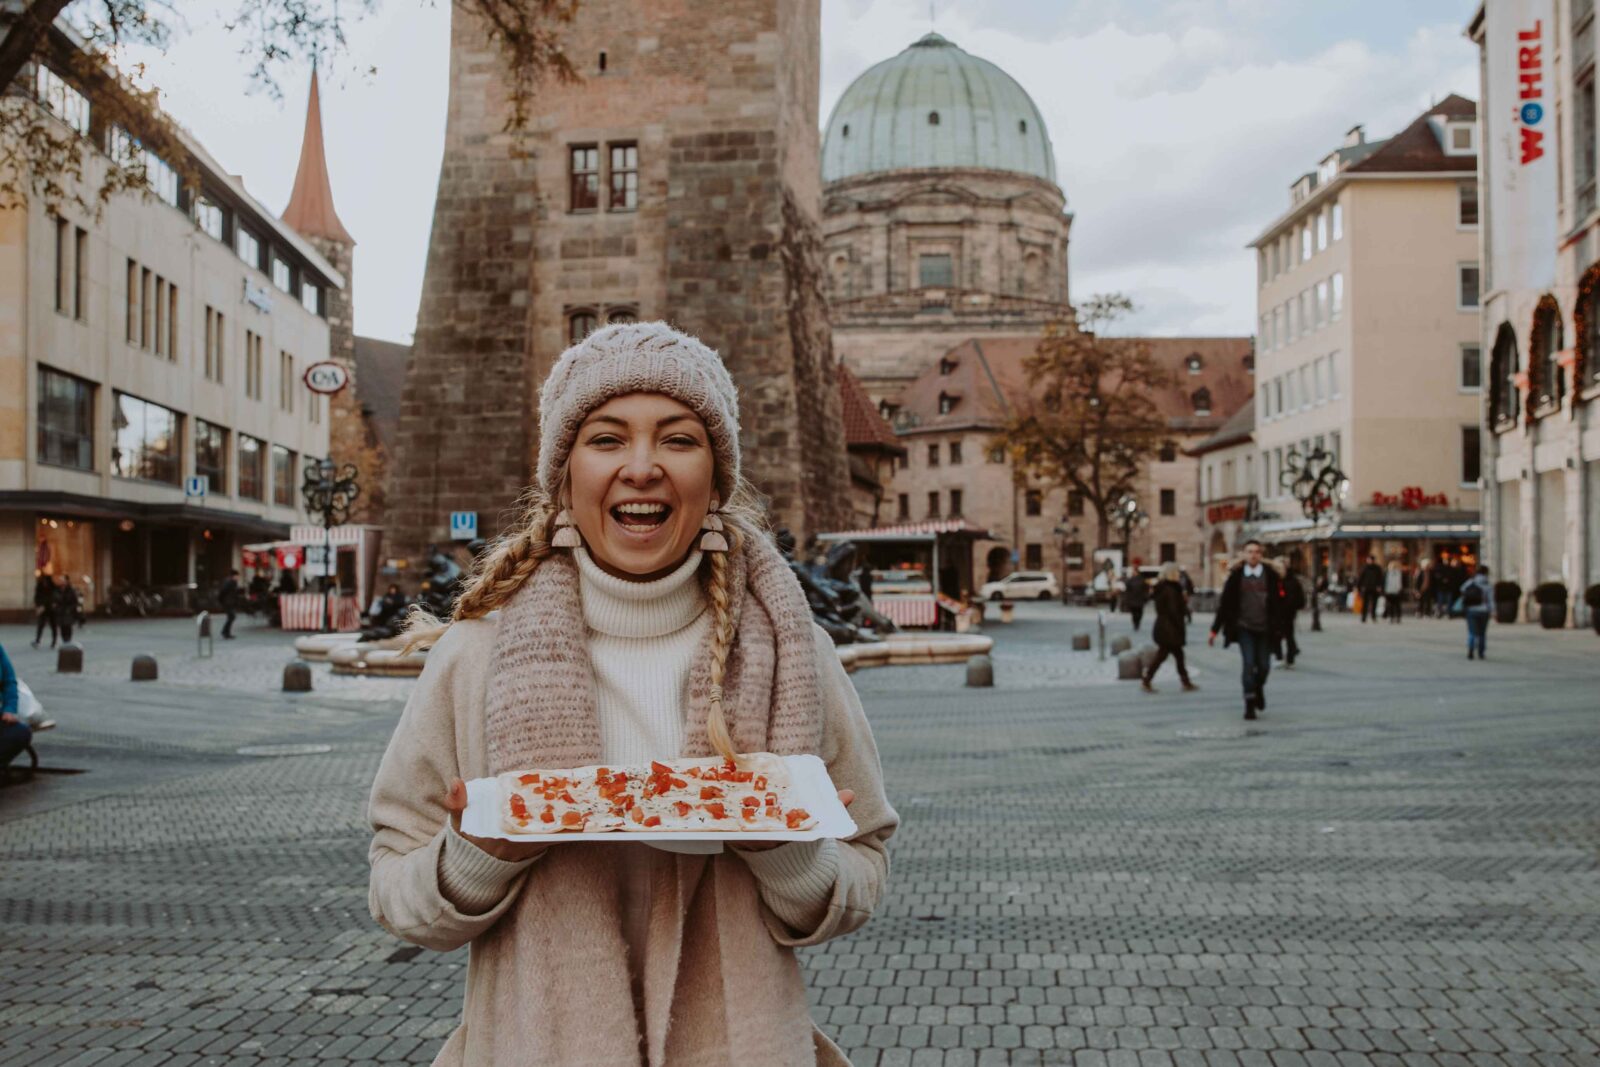 21 Food & Drinks you must try at the German Christmas Markets